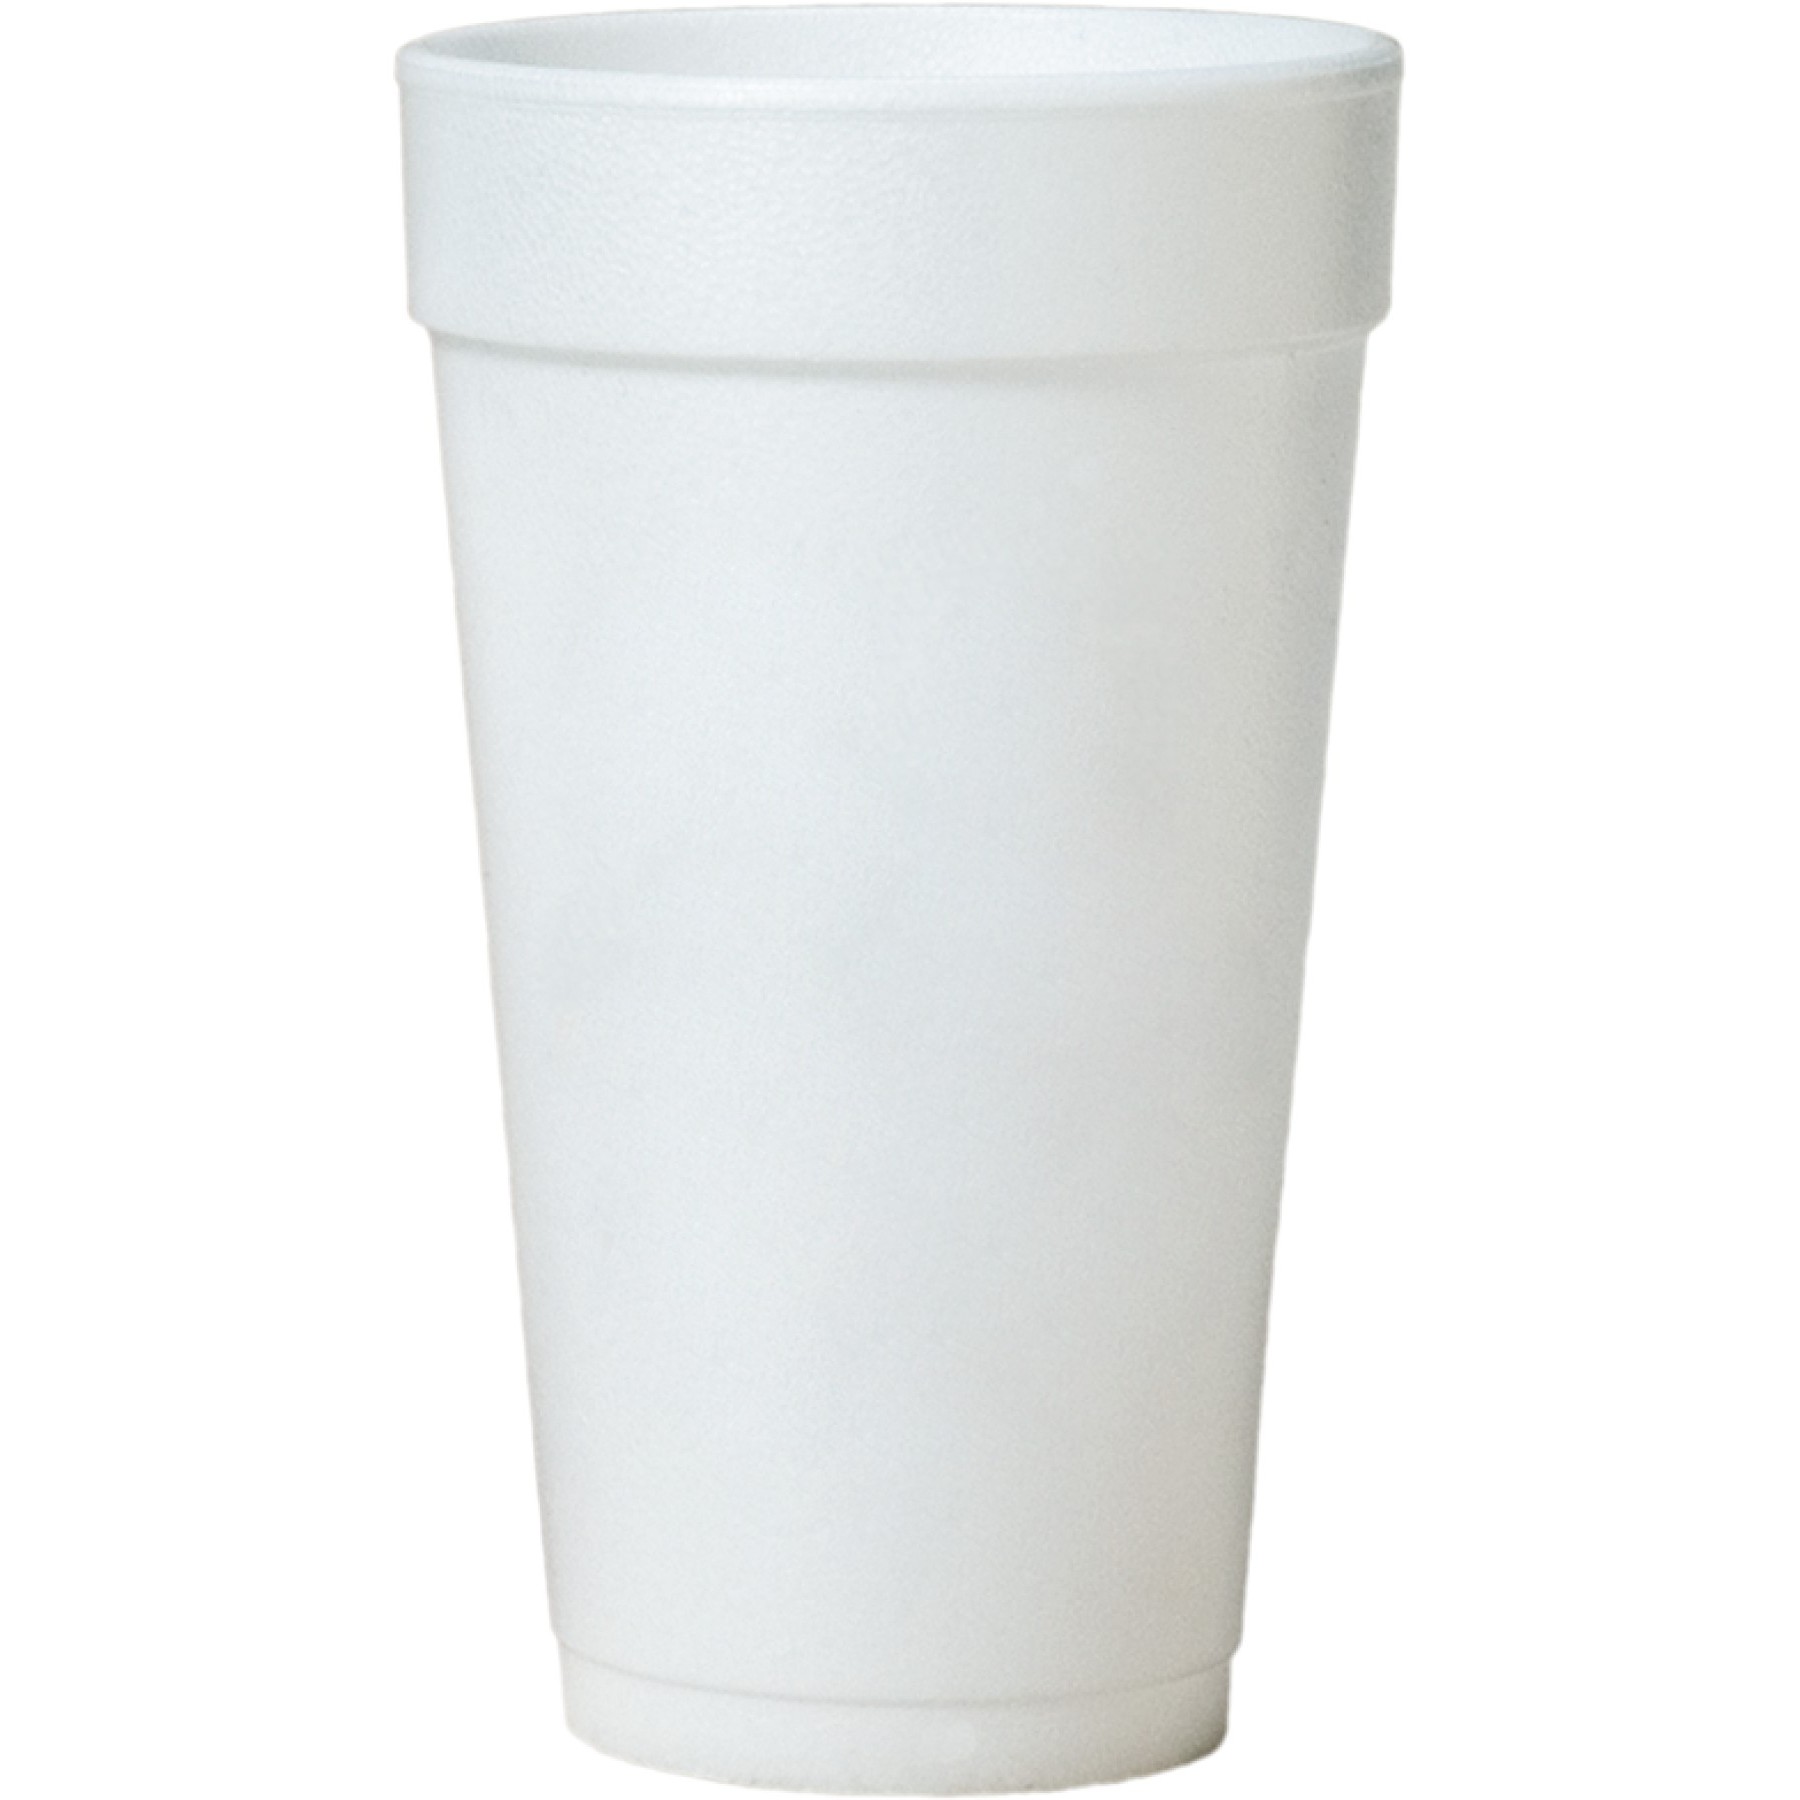 34 oz to cups